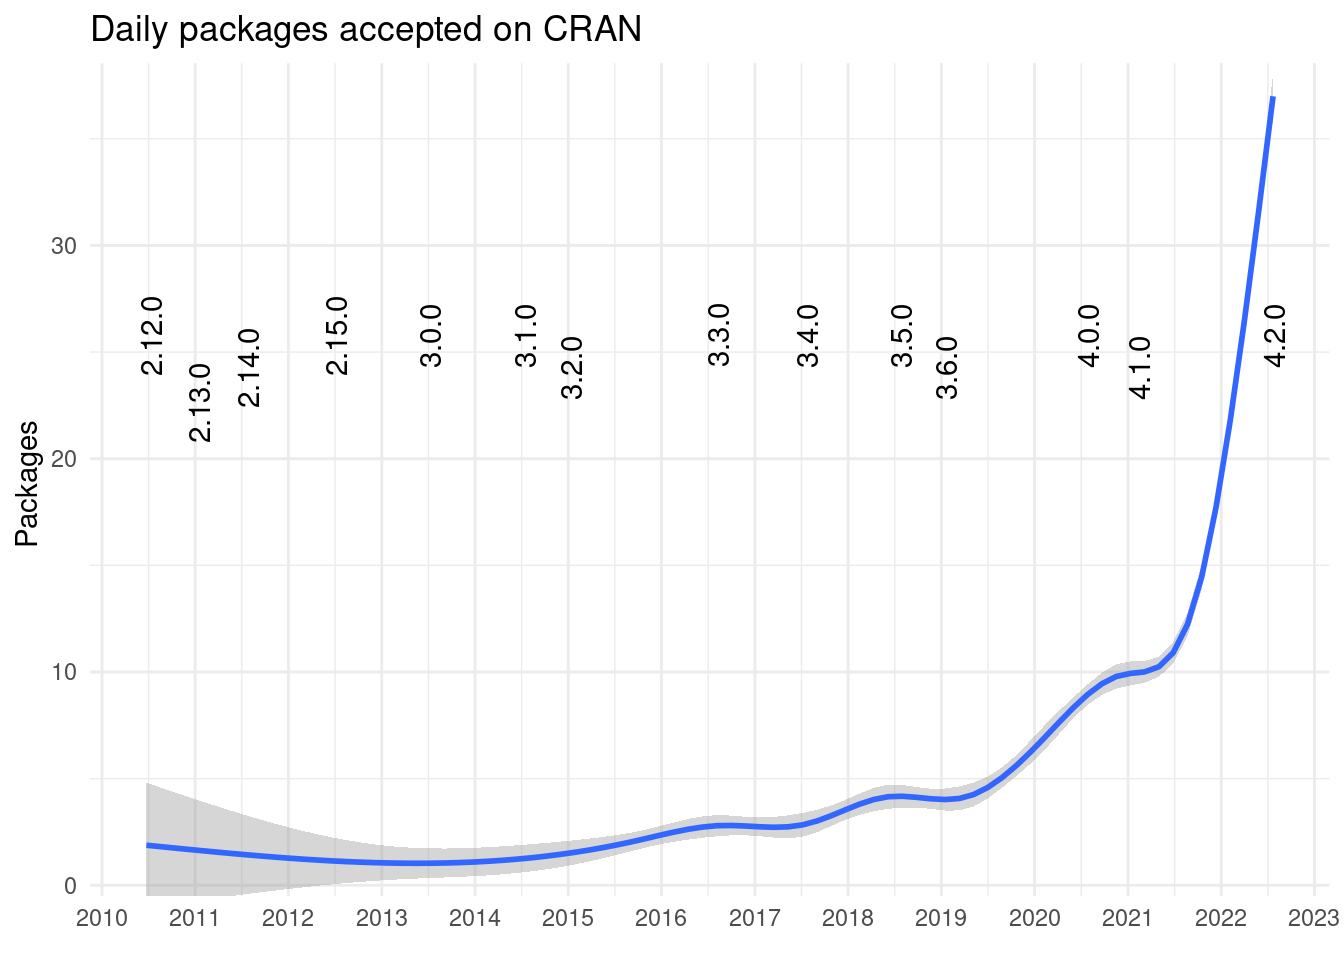 ggplot2 plot of date vs packages accepted on a given day. Until2020 less than 10 packages were accepted daily. Lately more than 30 are added to CRAN. The plot also displays the R release versions from 2.12 in 2010 to 4.2.0 in 2022.